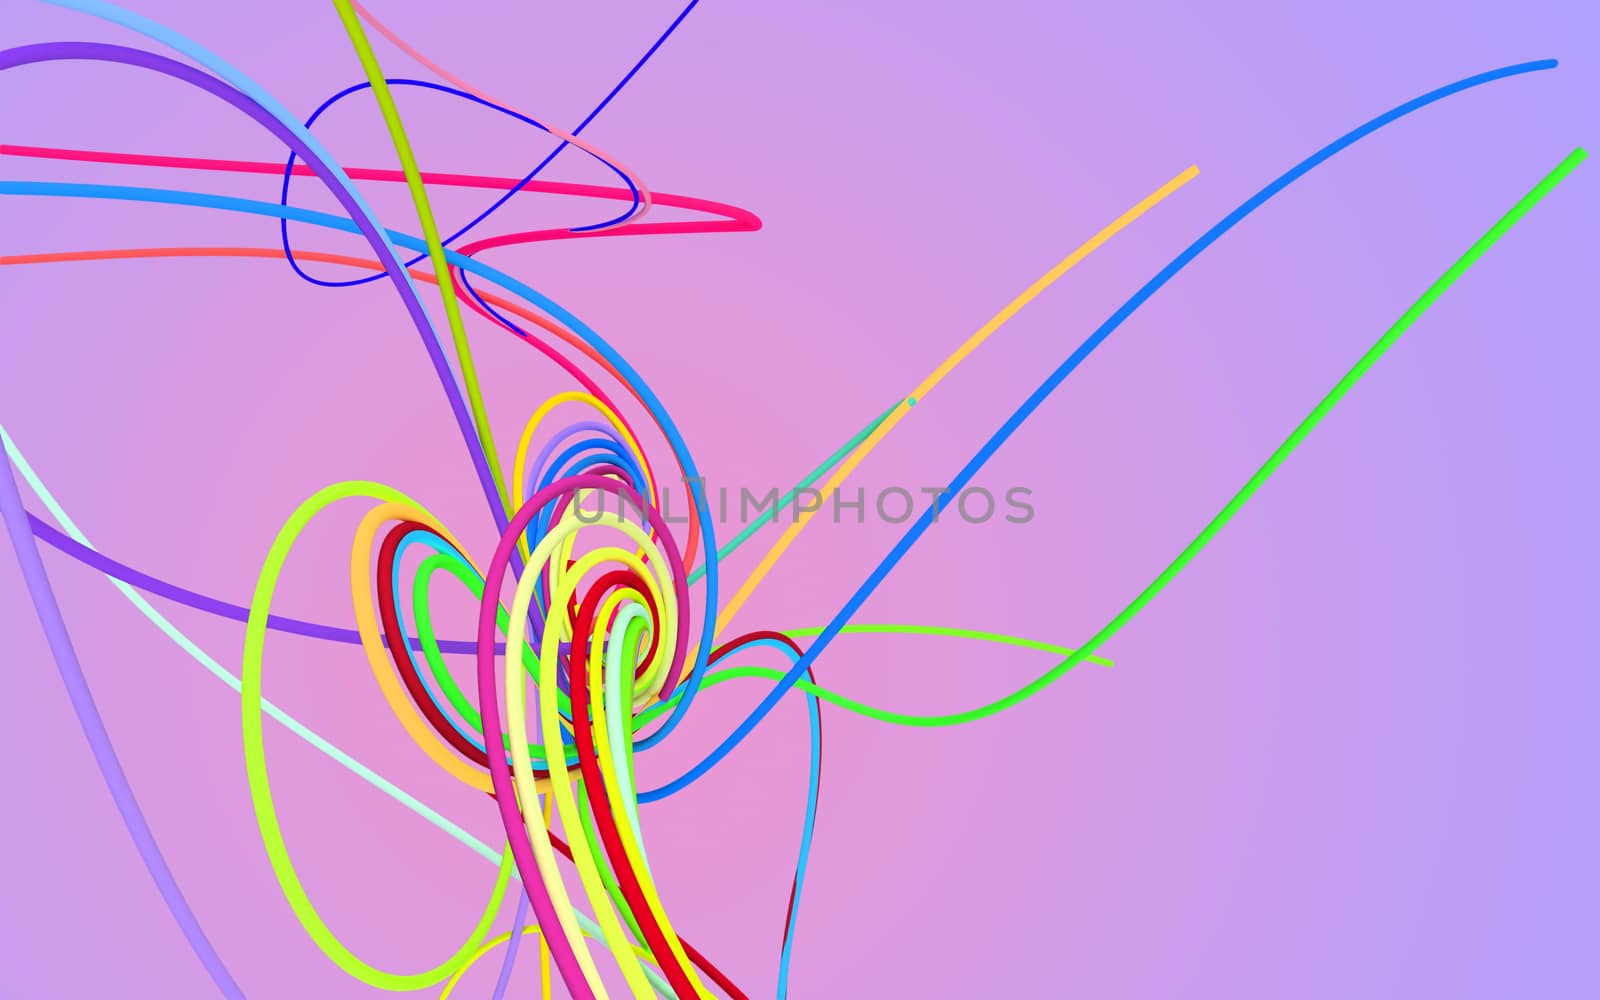 Moving colorful lines of abstract background by teerawit